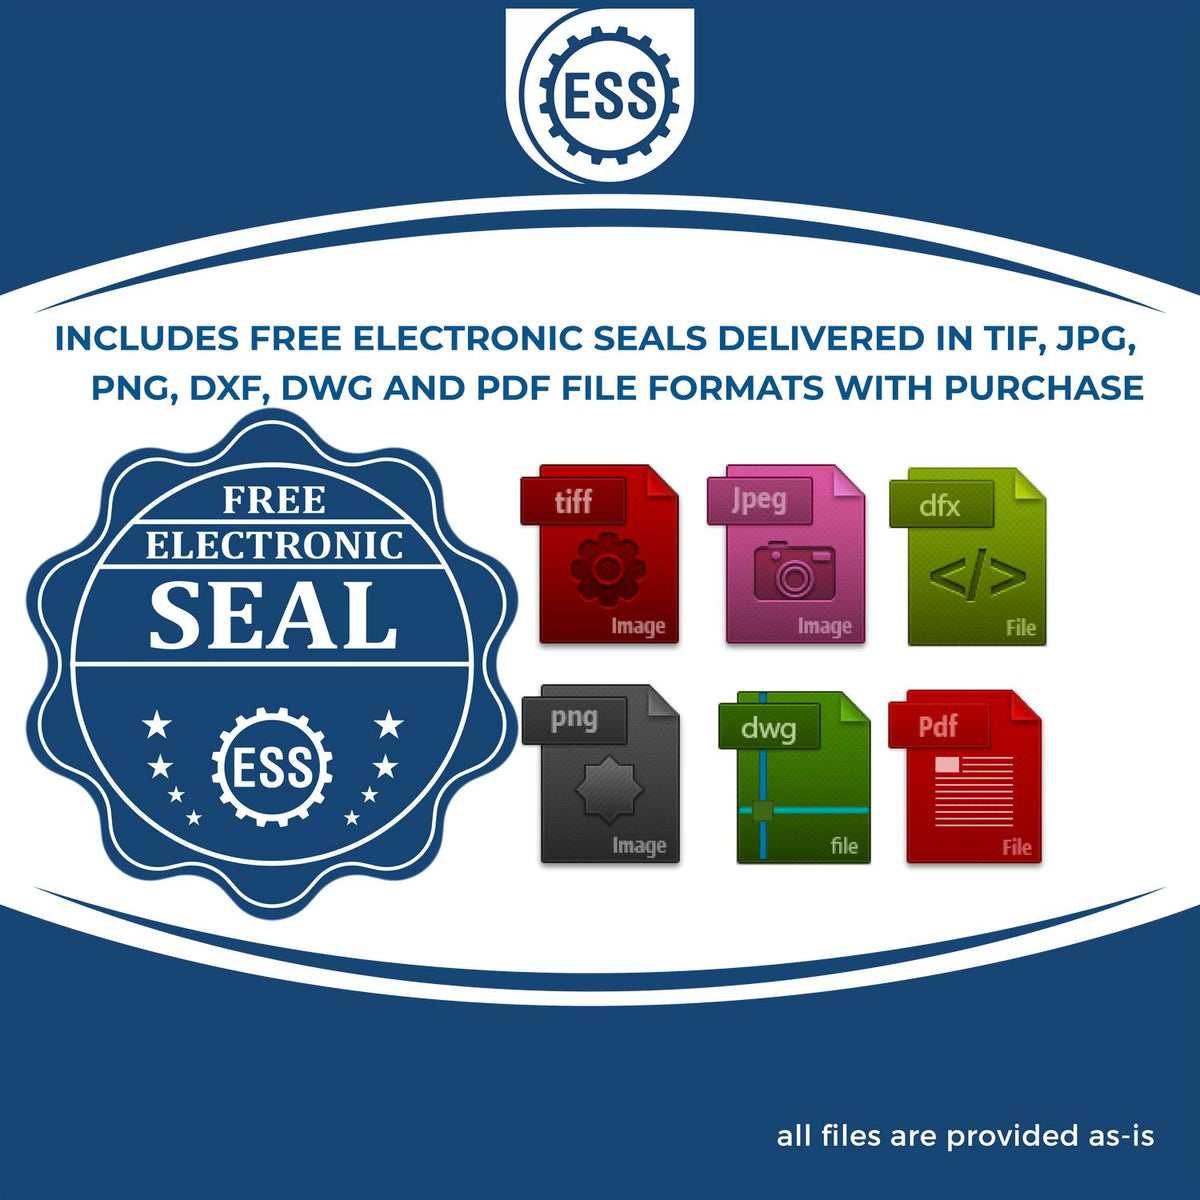 An infographic for the free electronic seal for the Gift Utah Landscape Architect Seal illustrating the different file type icons such as DXF, DWG, TIF, JPG and PNG.